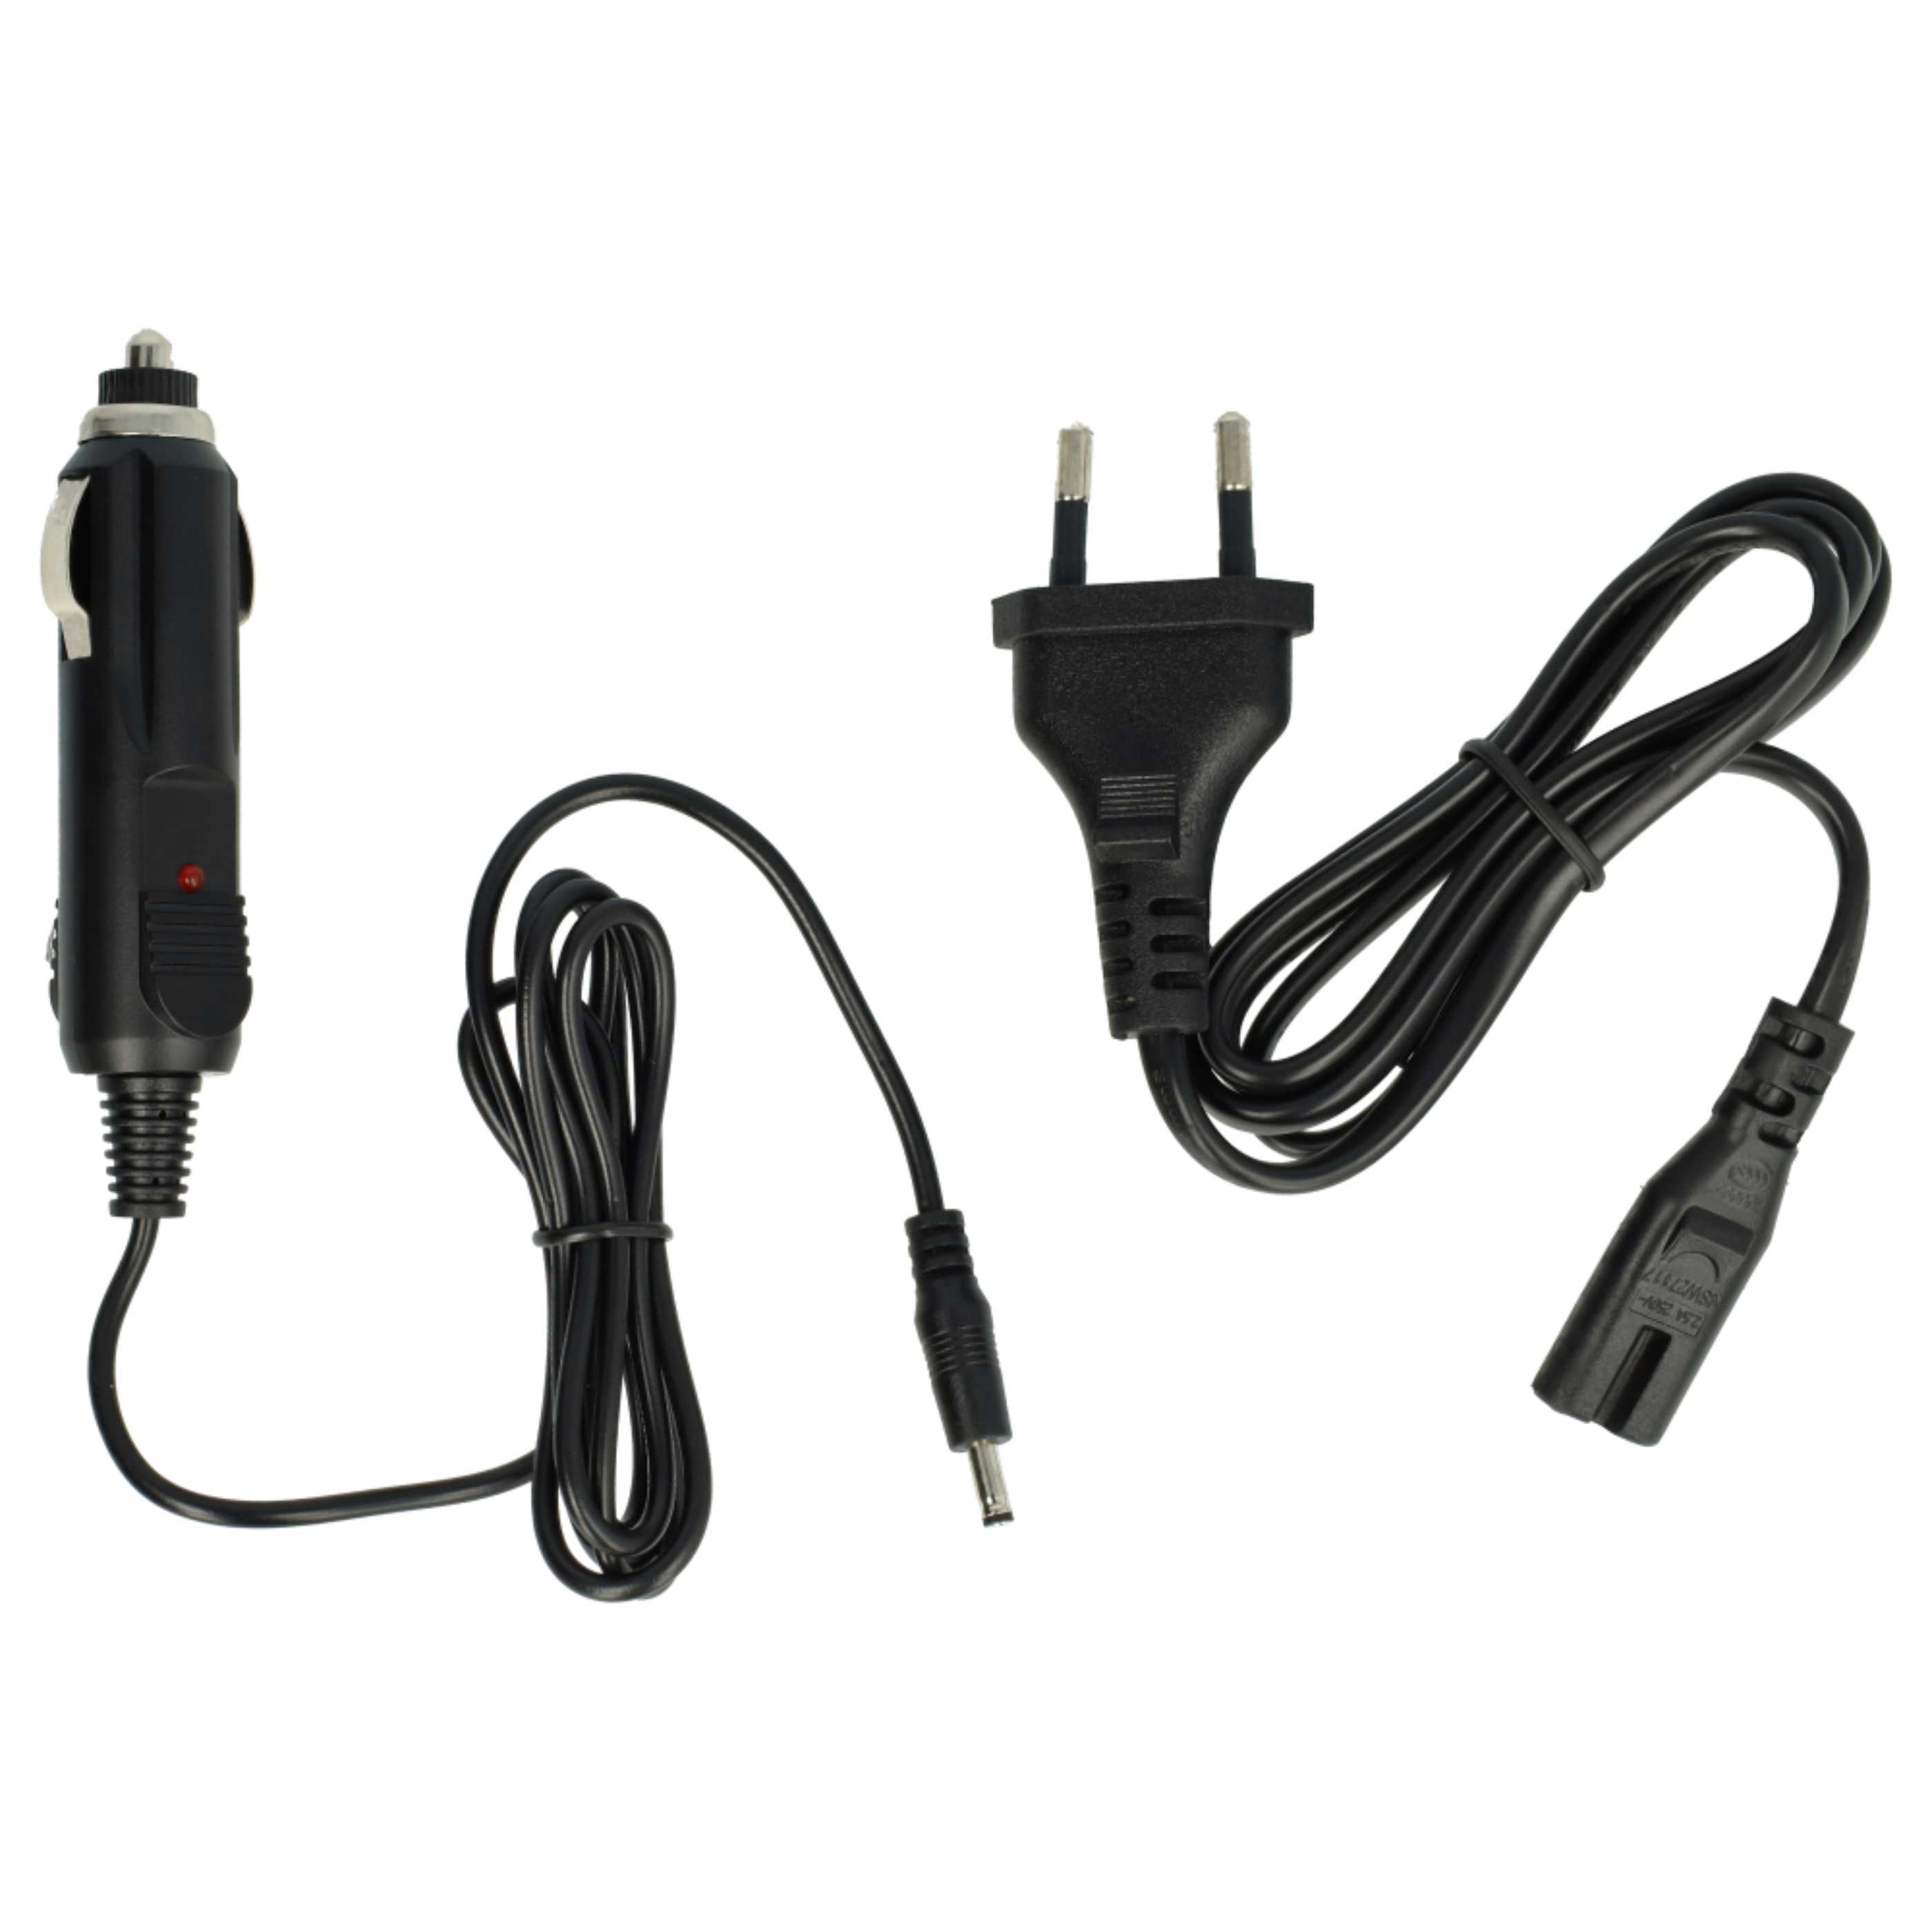 Battery Charger suitable for General Imaging GB-20 Camera etc. - 0.6 A, 4.2 V